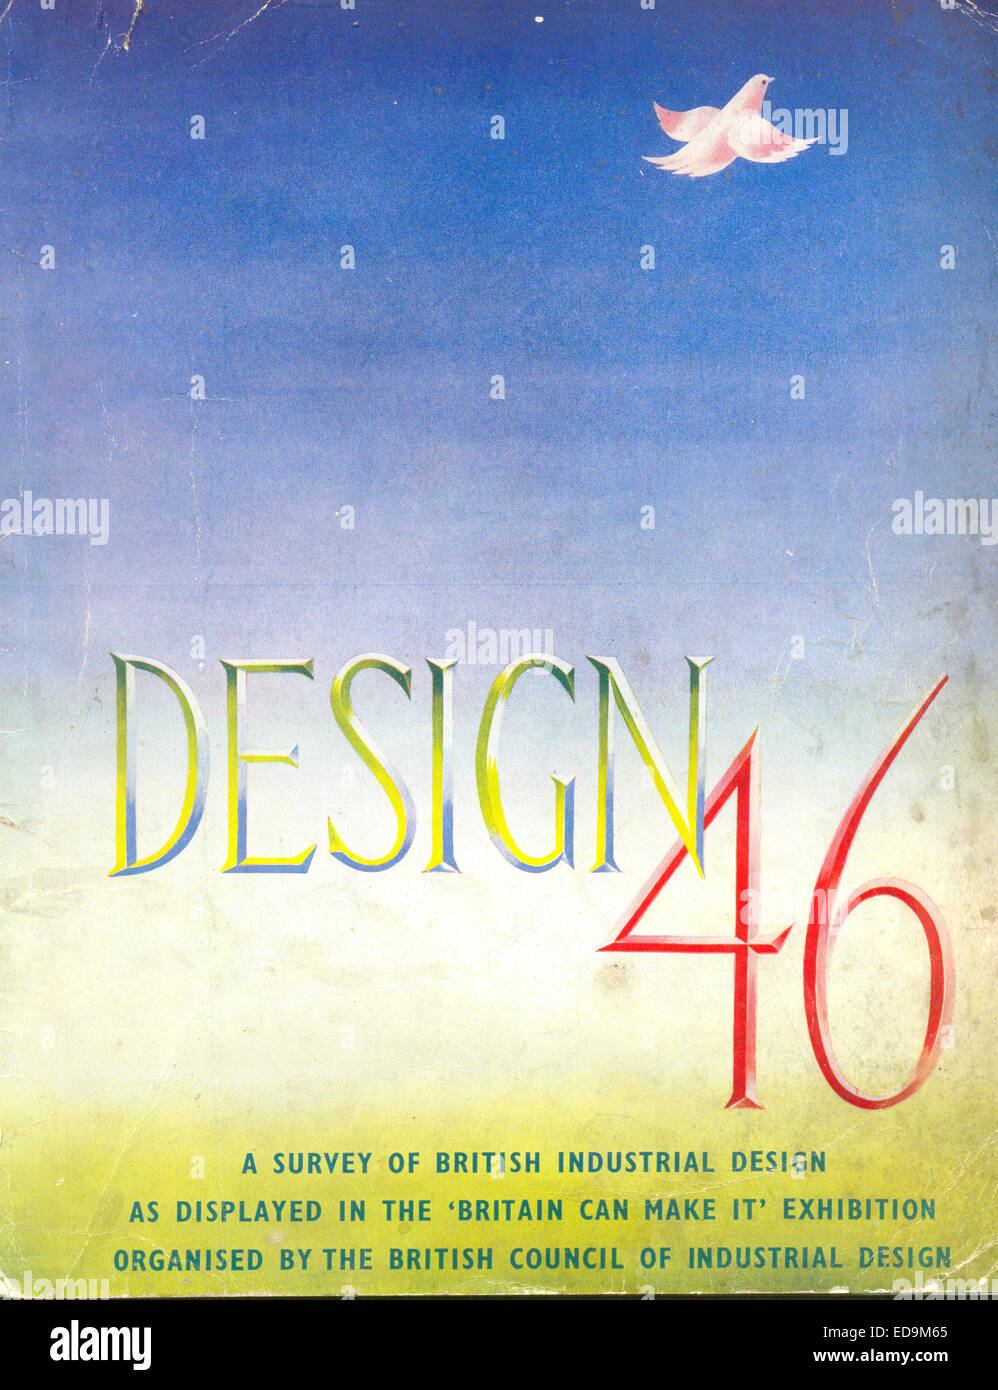 Catalogue cover for Design '46, A Survey of British Industrial Design as displayed in the 'Britain can make it' exhibition organized by the British Council of Industrial Design Stock Photo